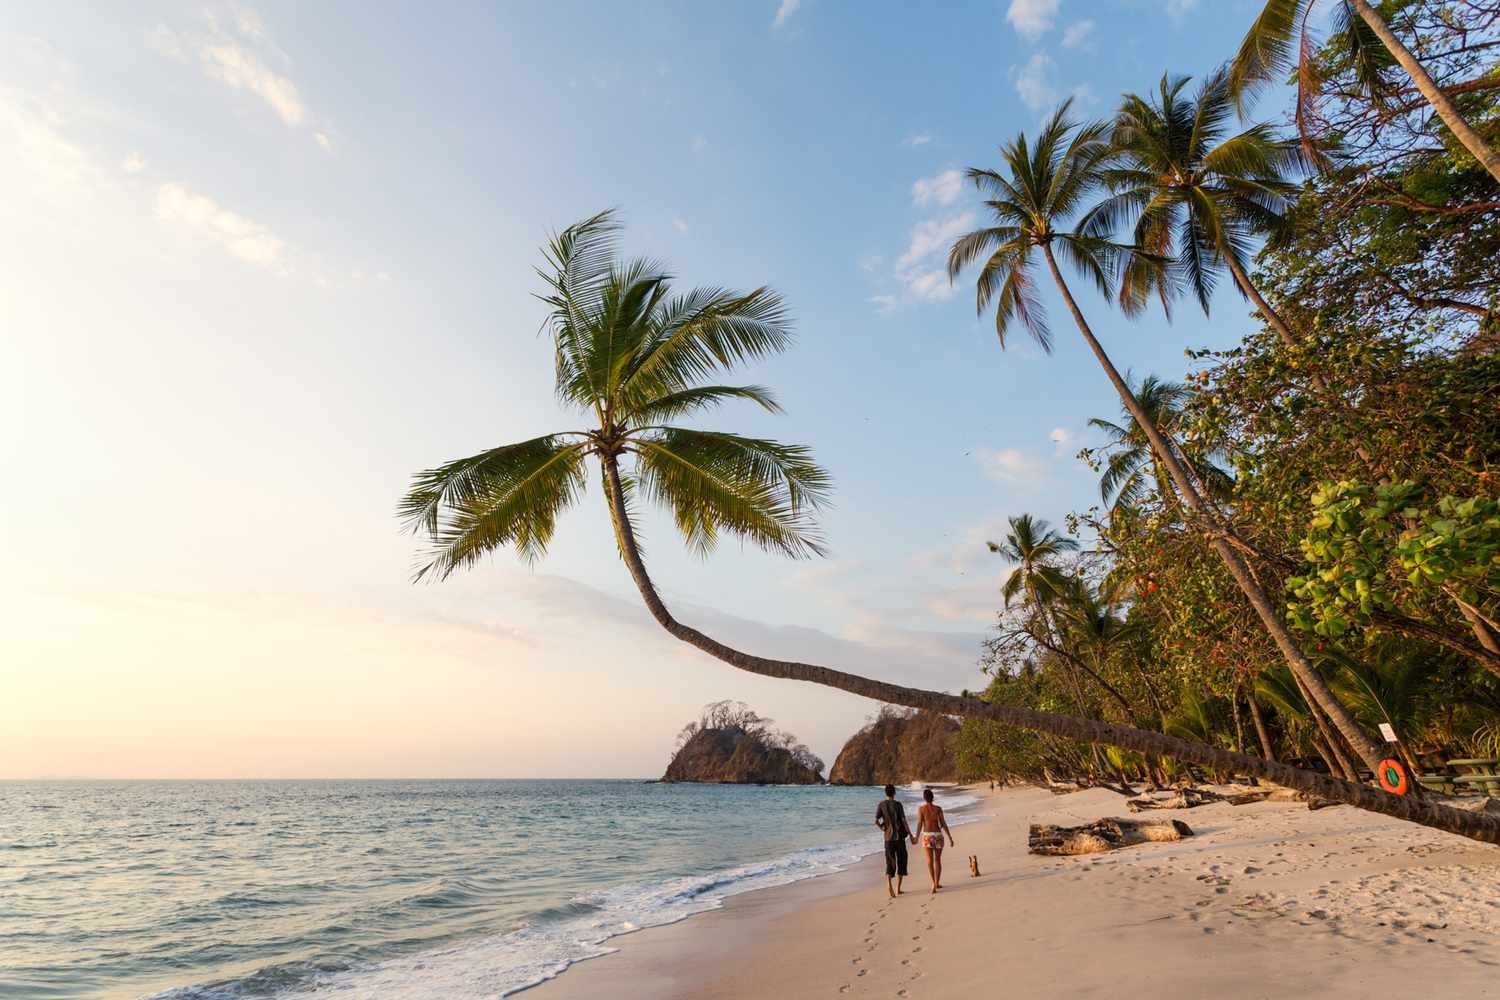 12 Affordable Honeymoon Destinations That Inspire Romance Without Breaking the Bank